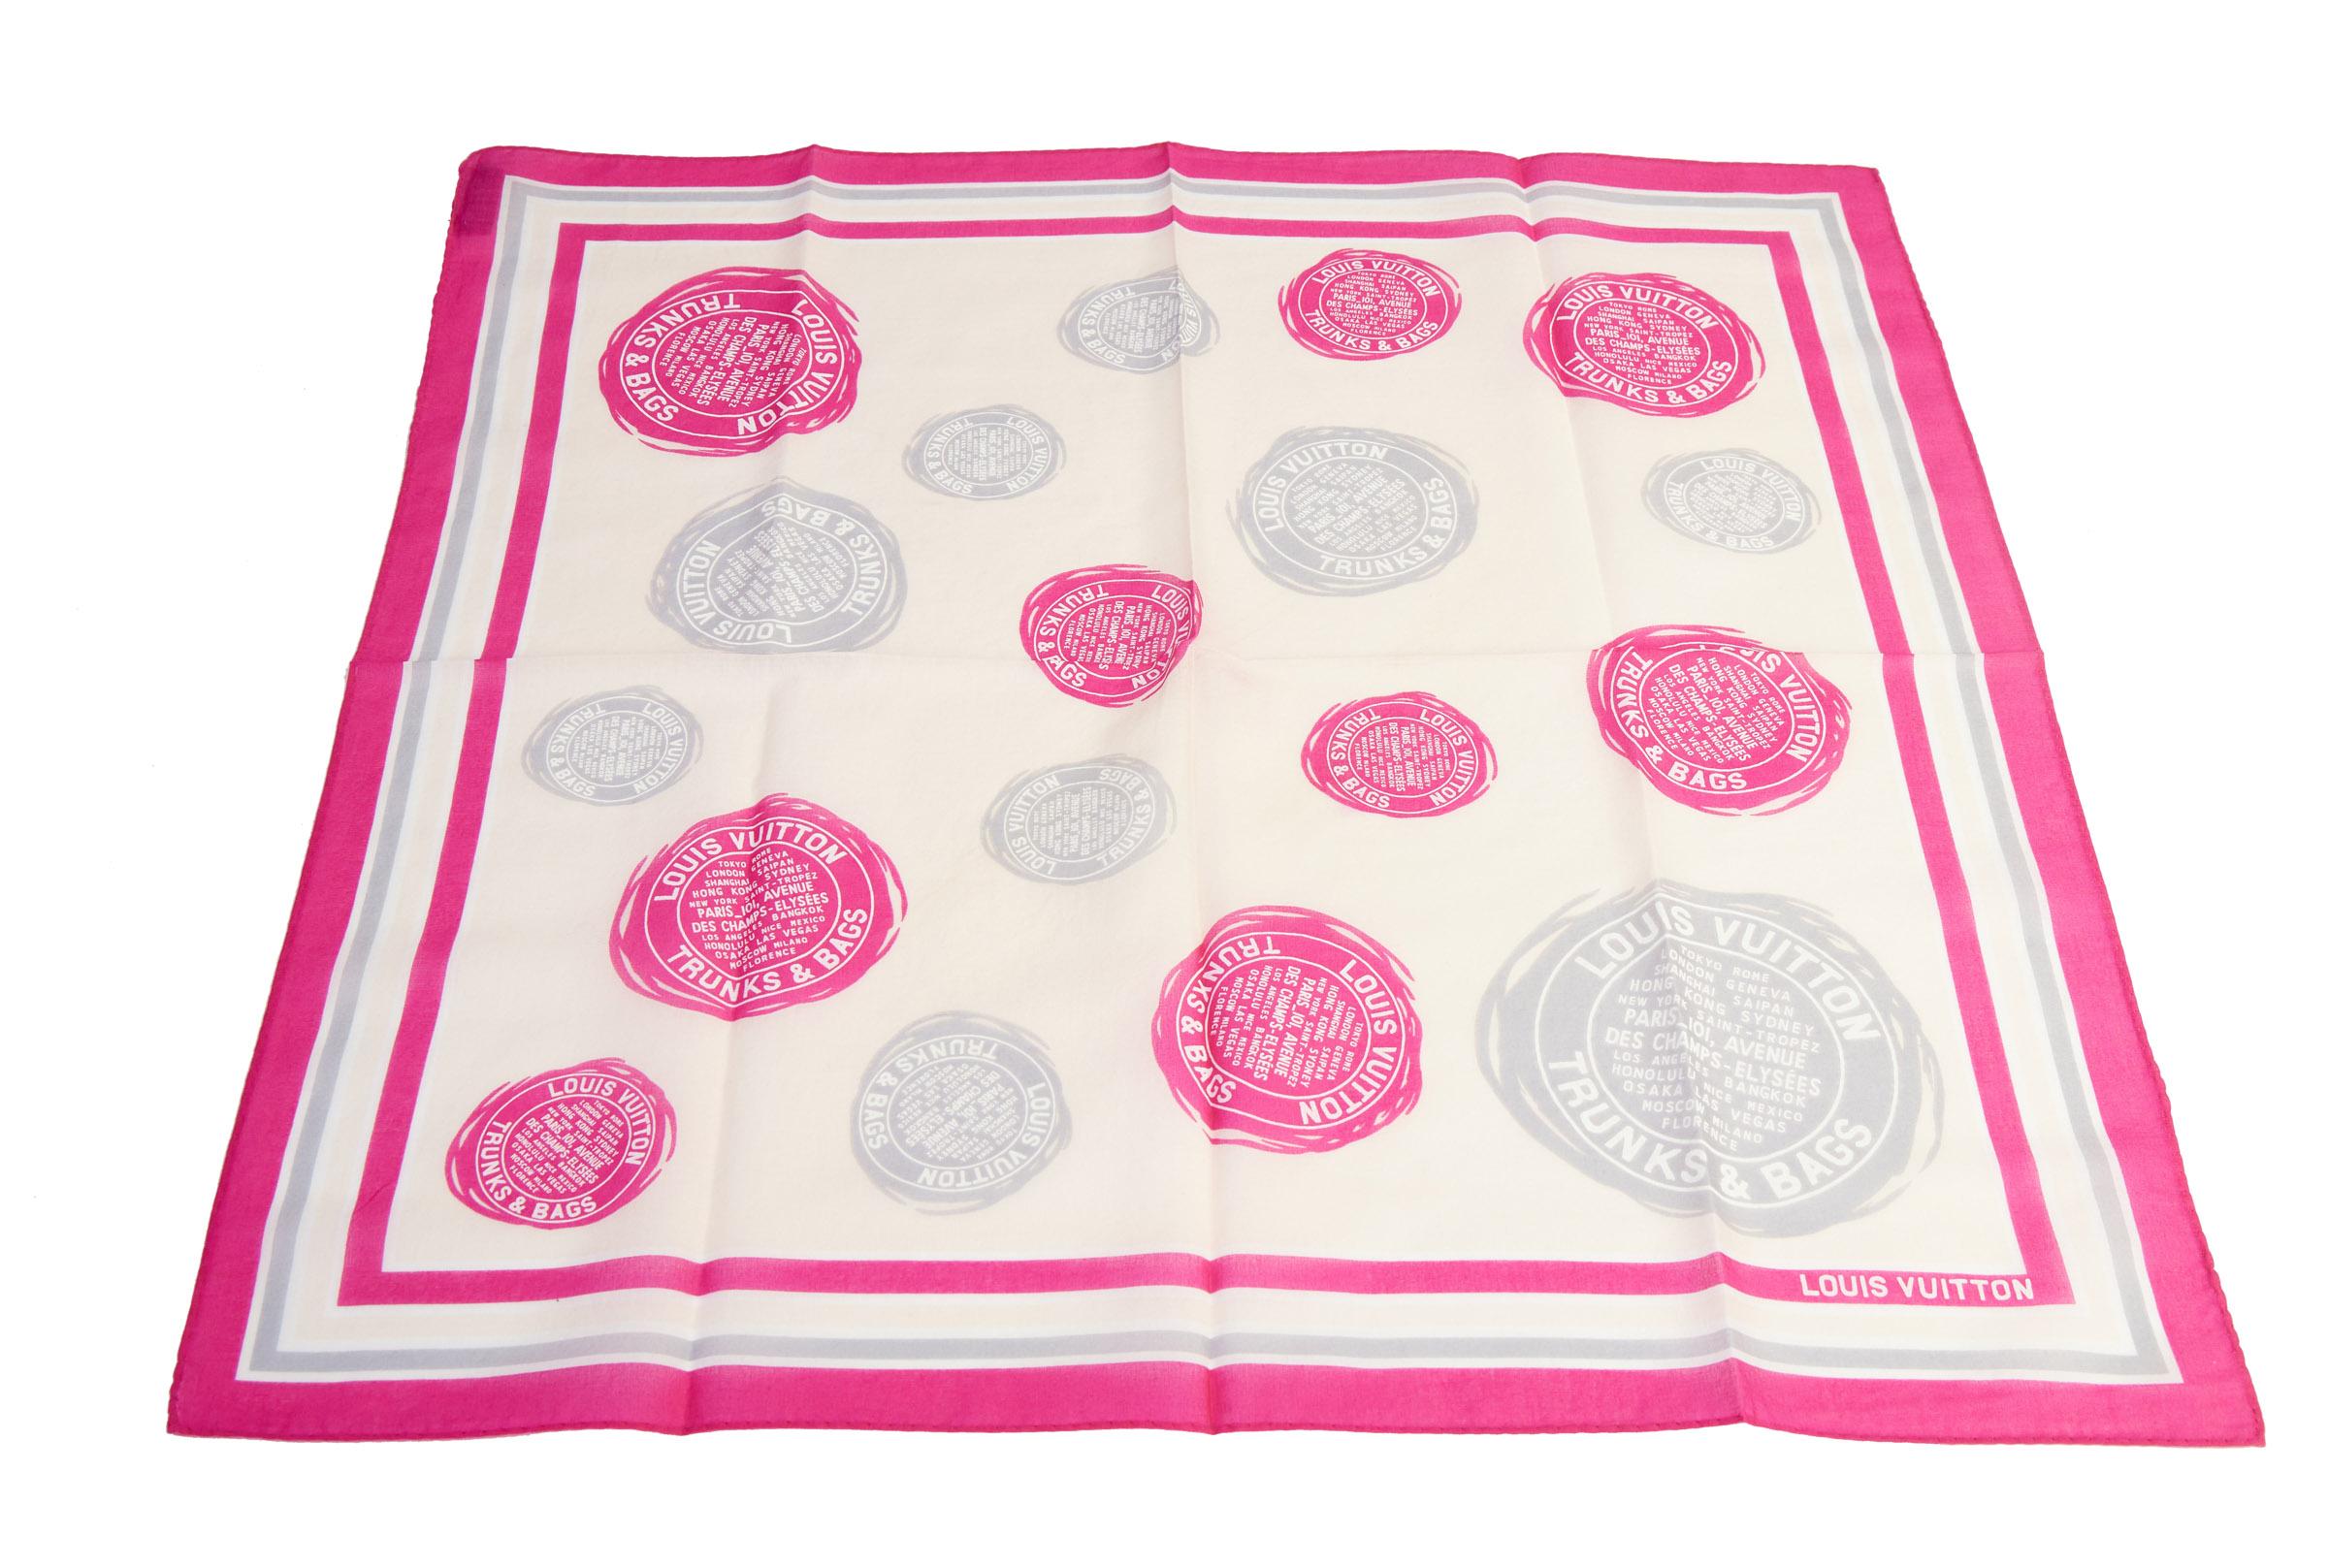 Louis Vuitton cotton square scarf with round seals design. Fuchsia and pink combination. Care tag and original box.
